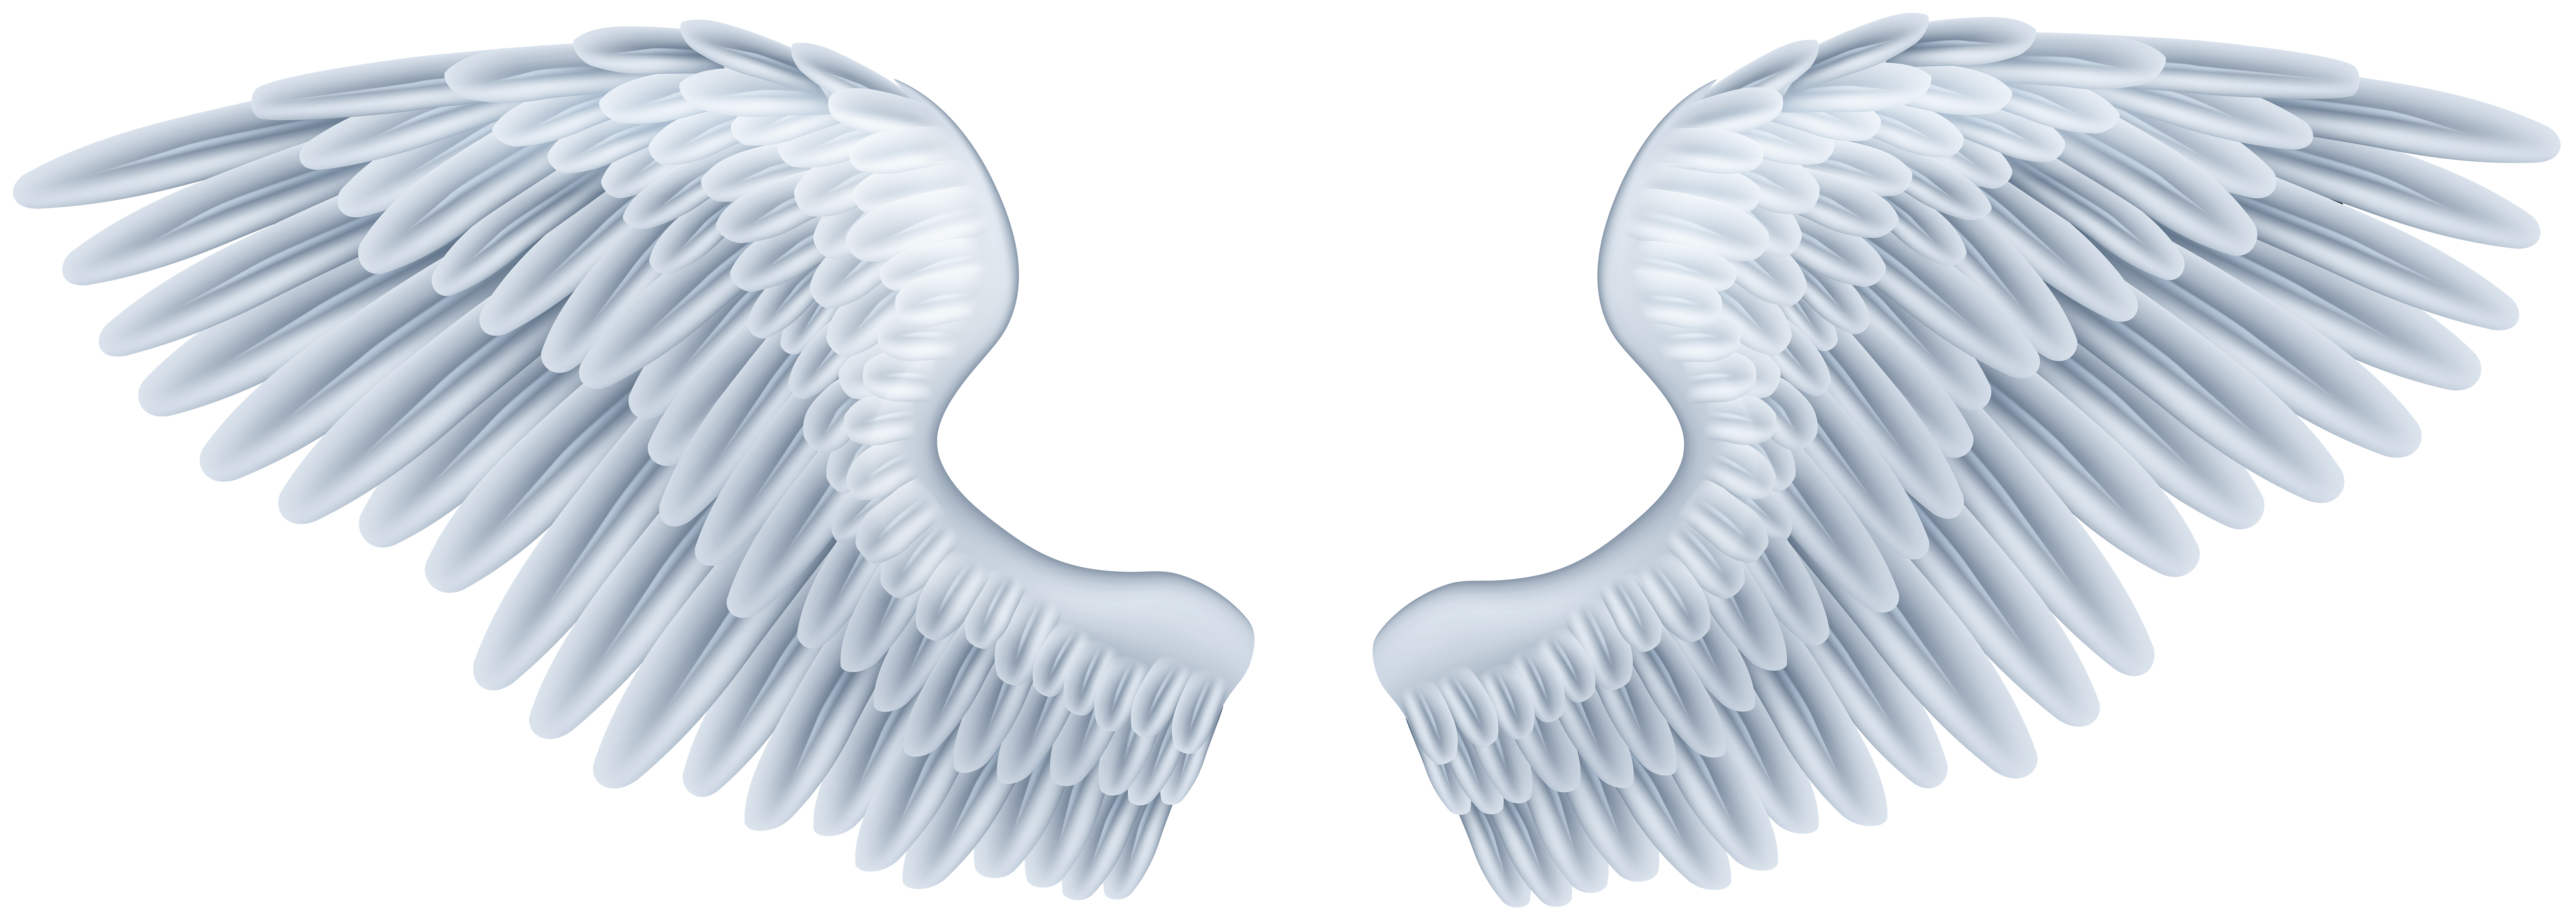 Angel Wings Png Clip Art Image Gallery Yopriceville High Quality Images And Transparent Png Free Clipart